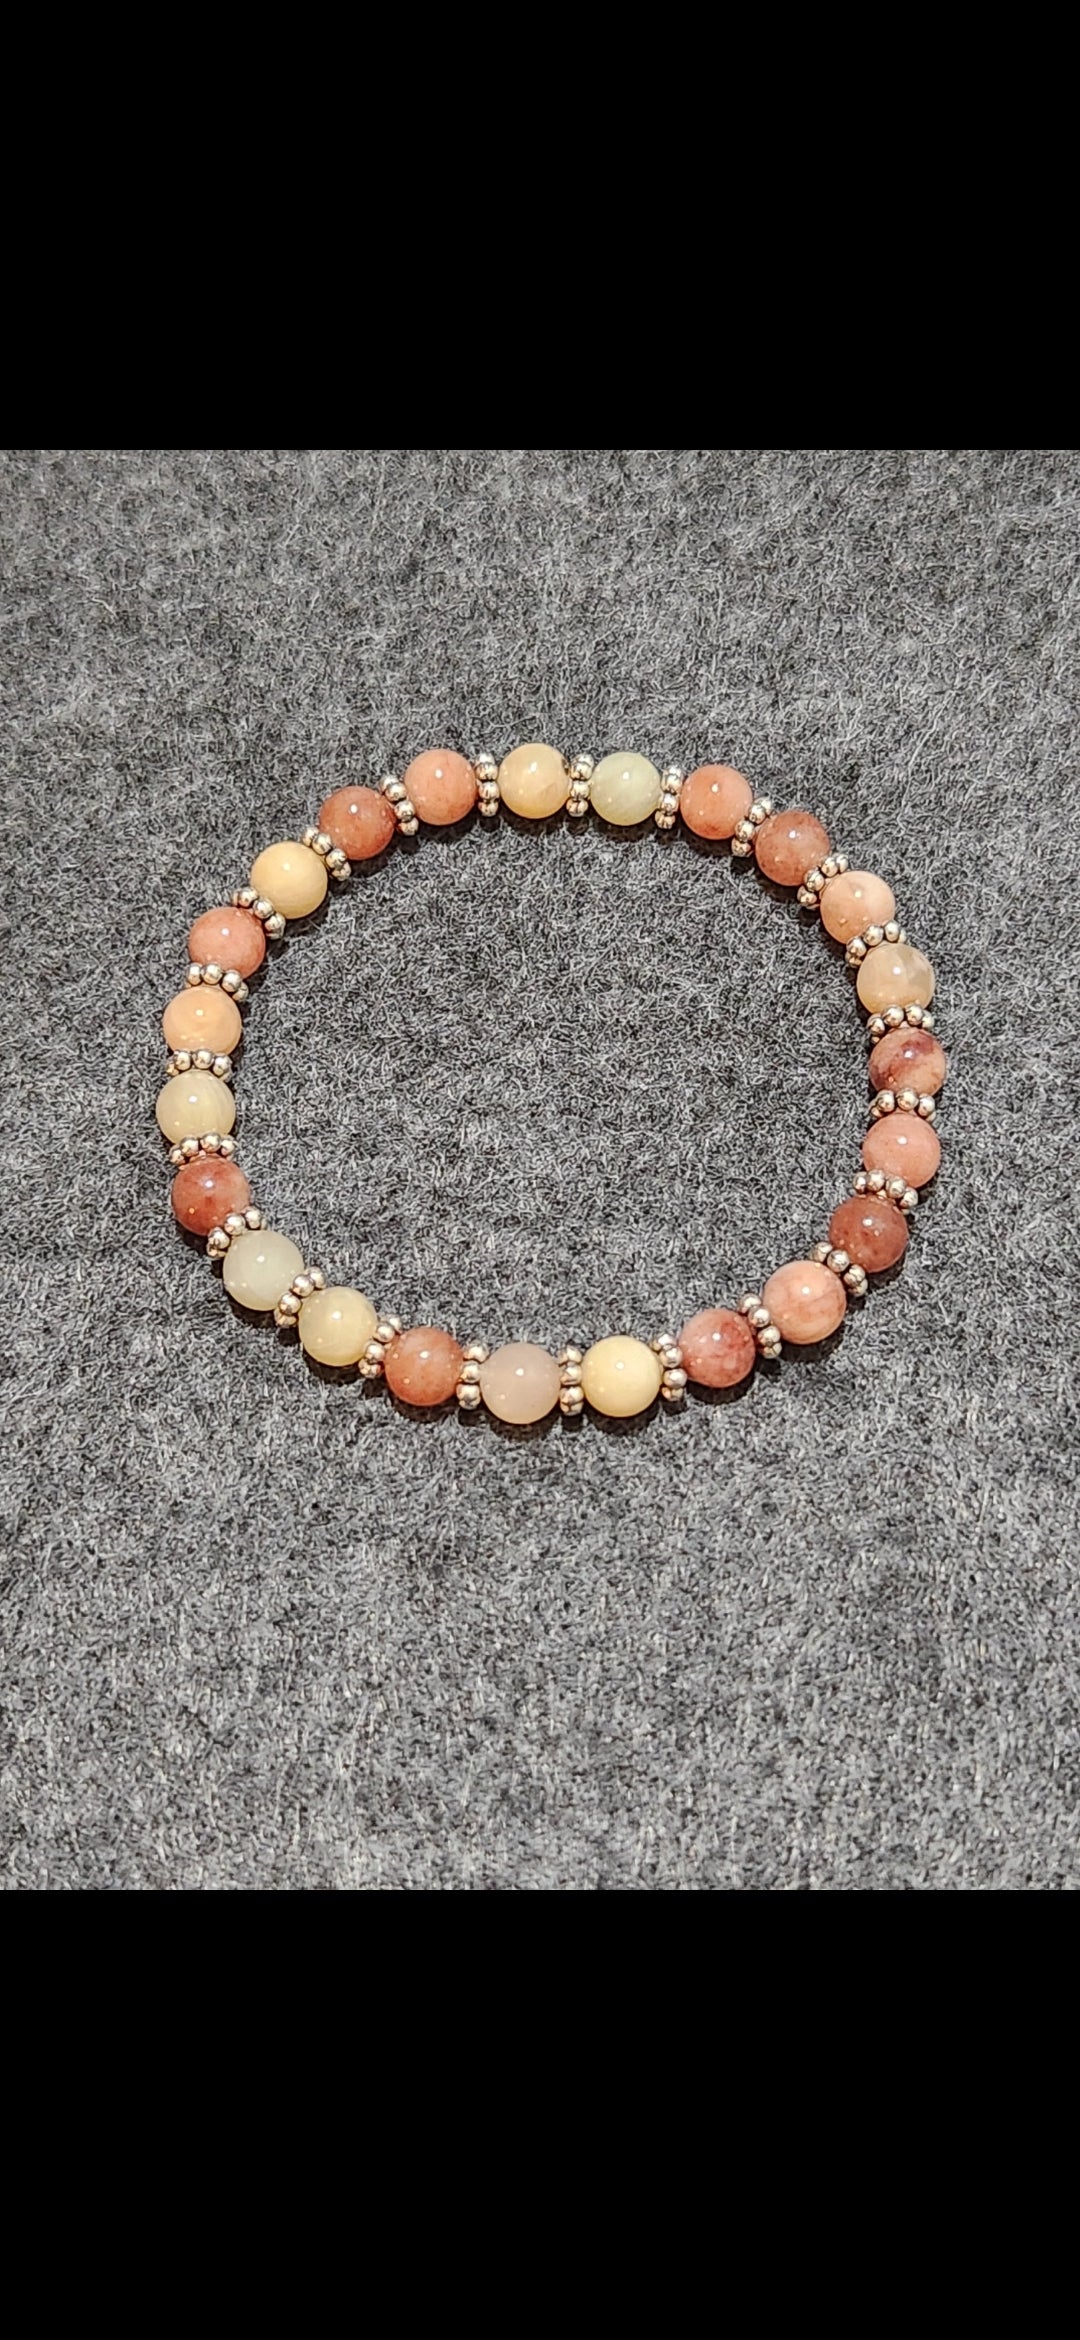 Sunstone Bracelet with accents - optimism - supportive - confidence - self worth - stress